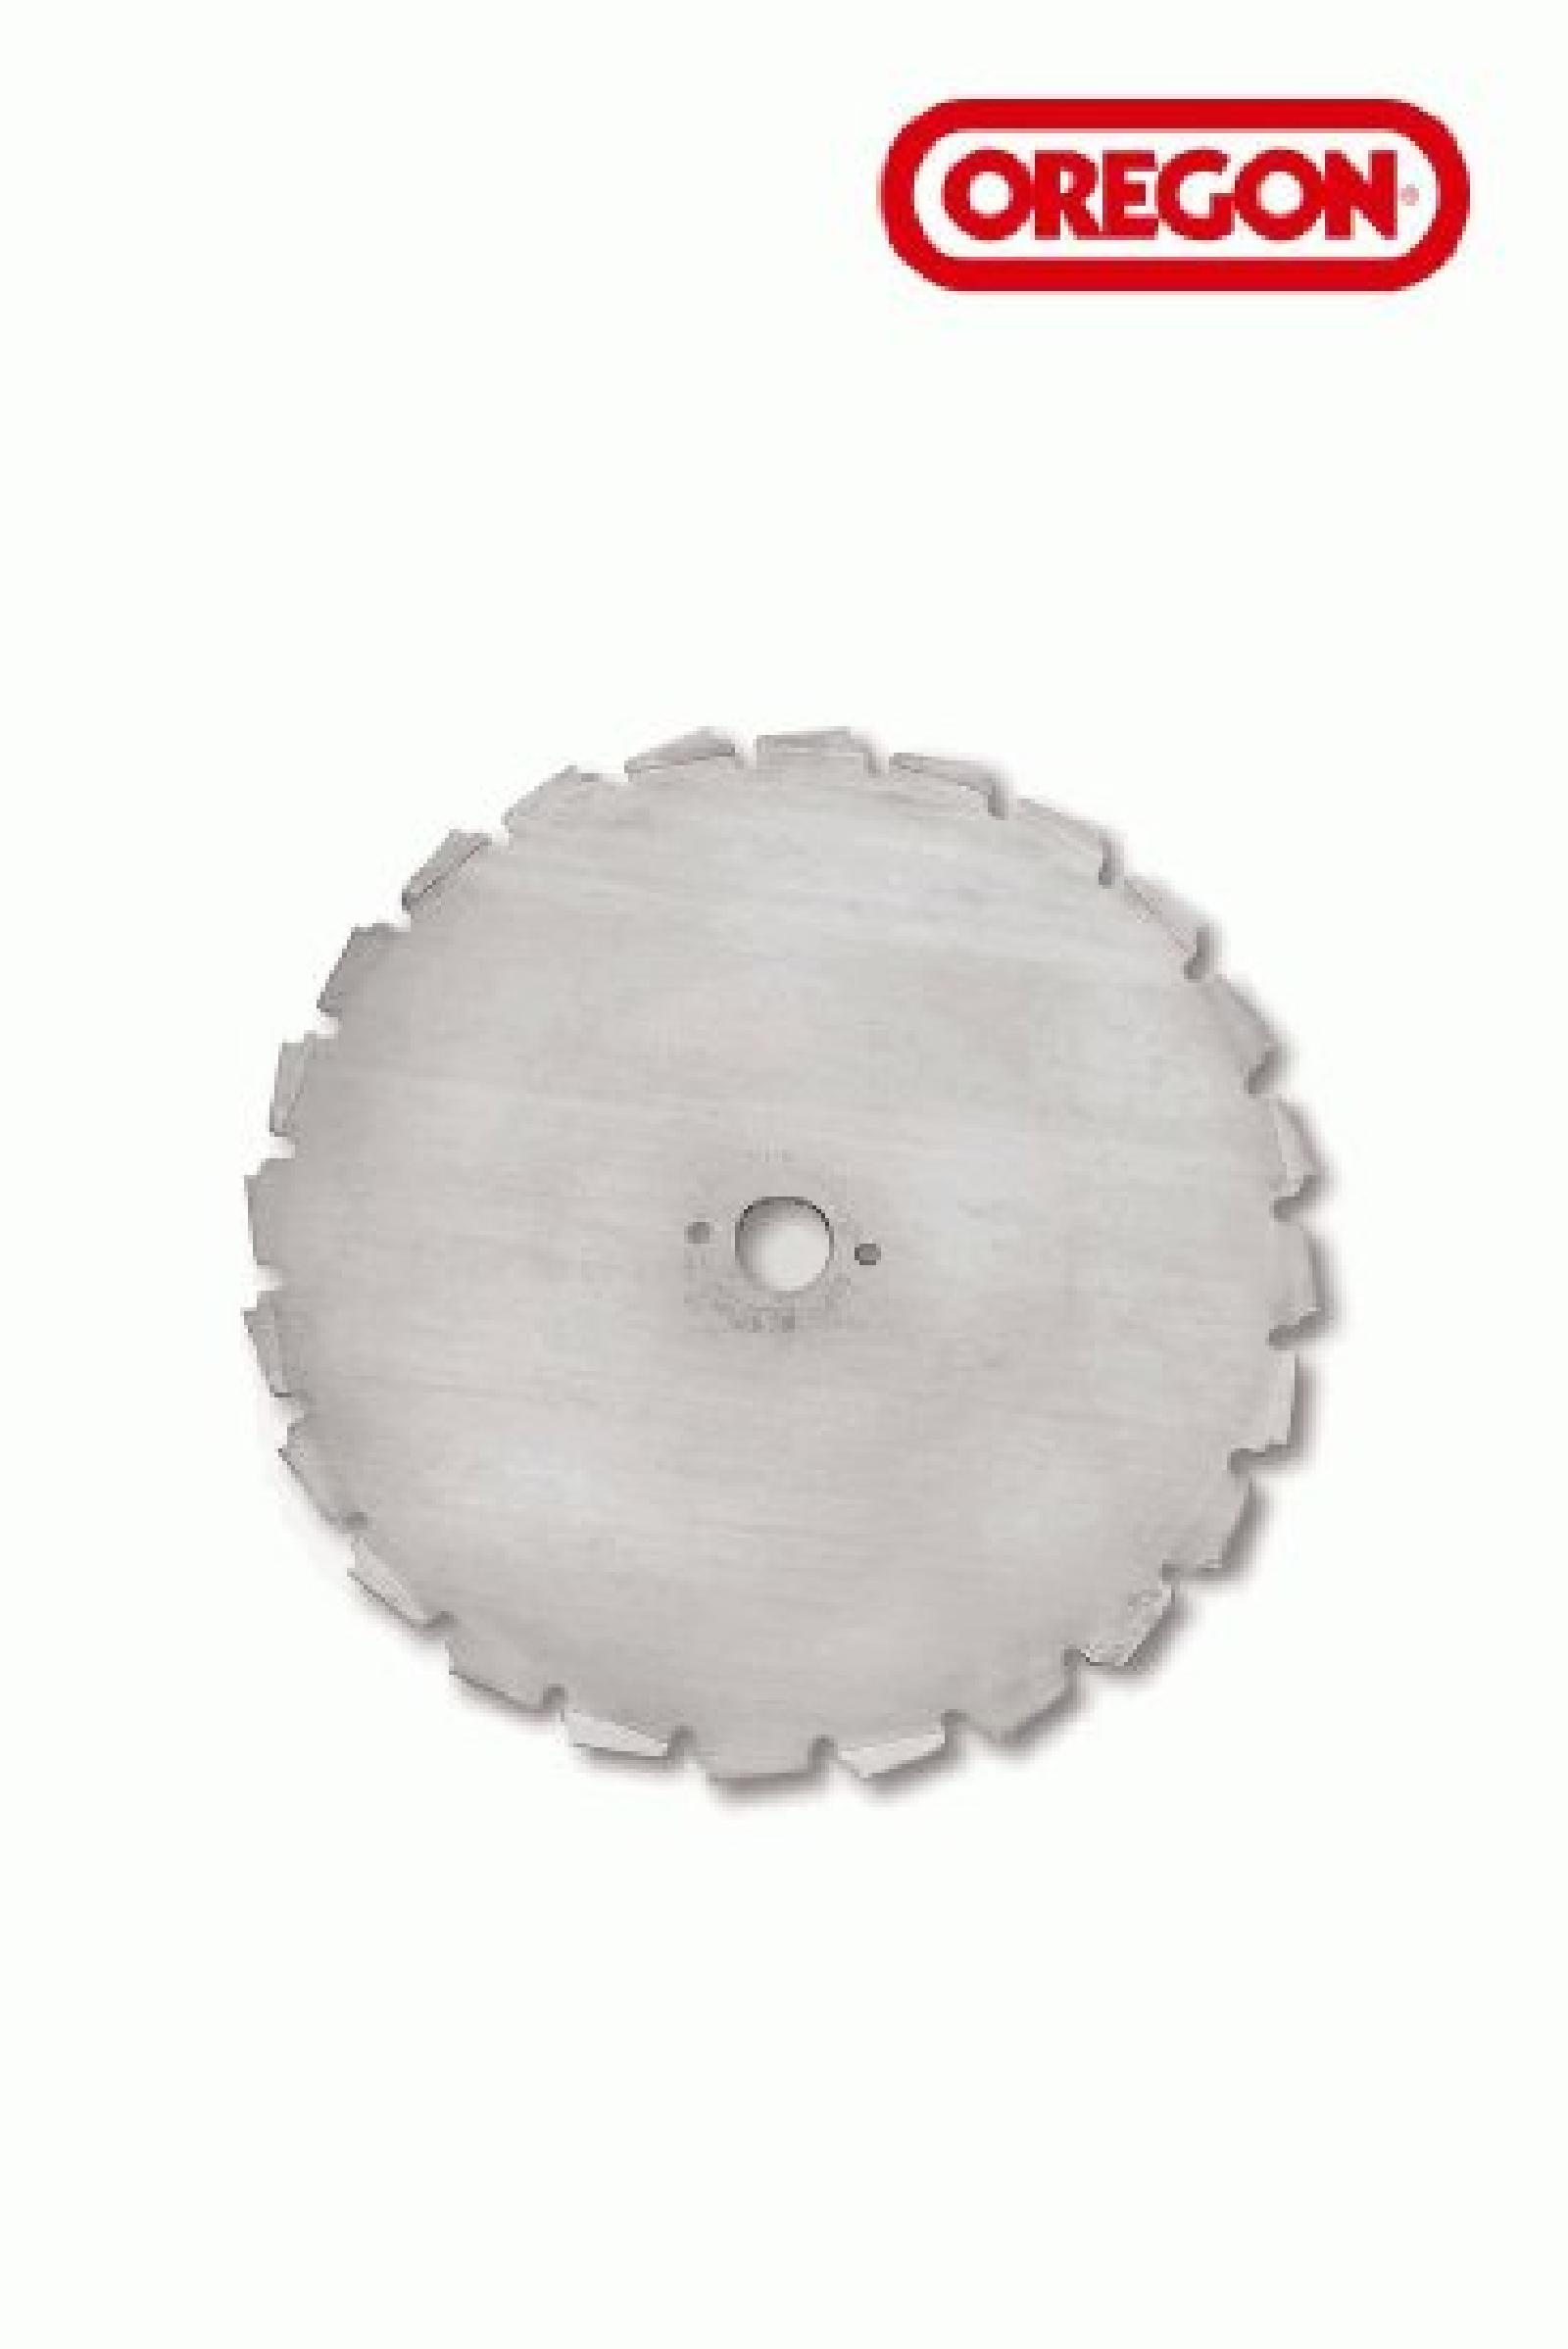 EIA BRUSH BLADE 8IN 22 TE part# 41-930 by Oregon